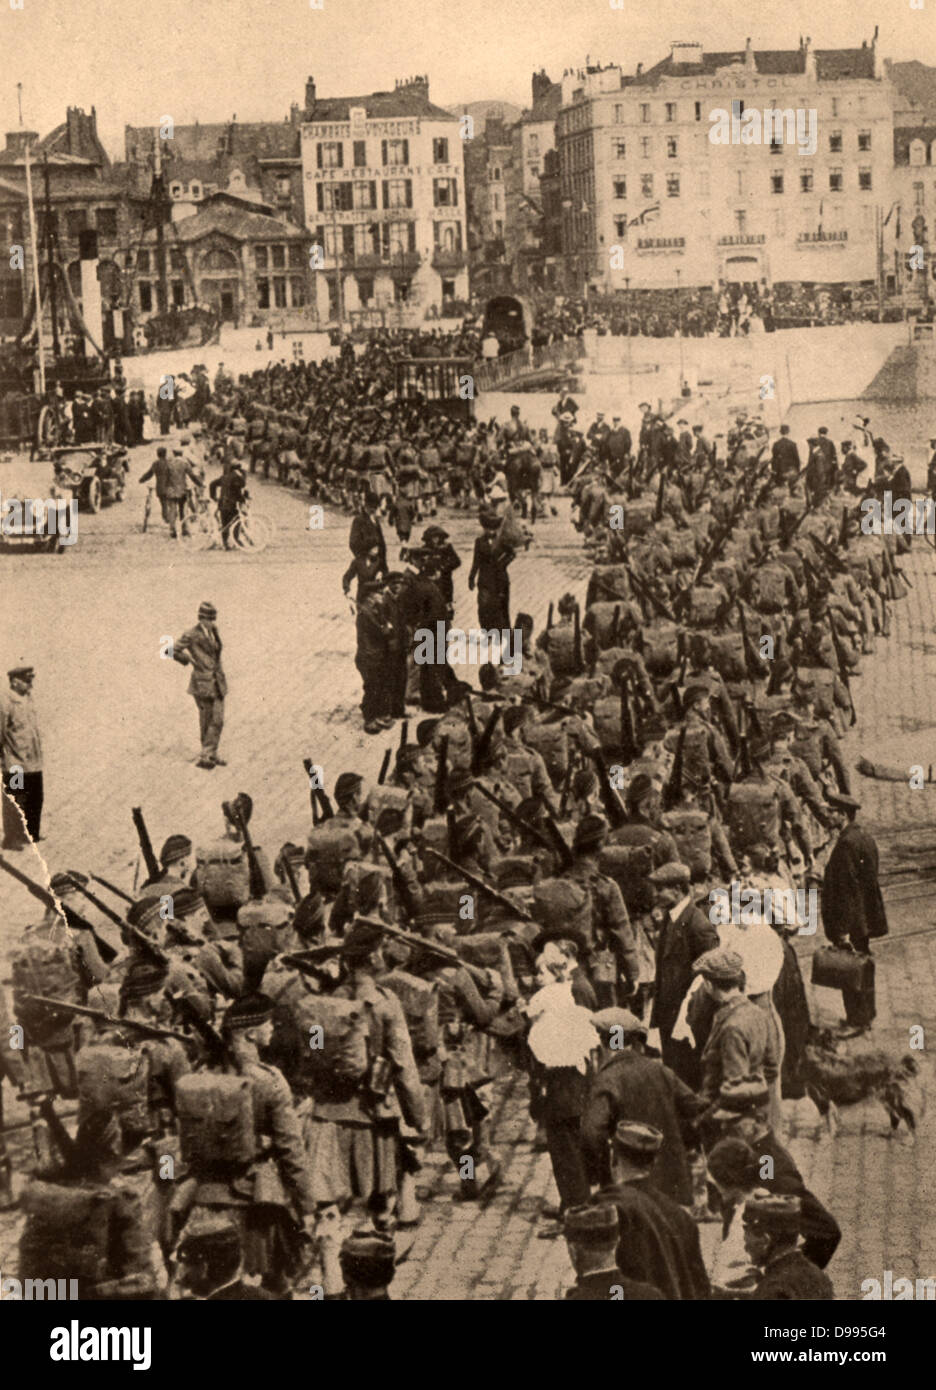 British Expeditionary Force: Soldiers of a  British Highland (Scottish) regiment in traditional uniform kilts and wearing the Glengarry (bonnet), marching through Boulogne, France, 1914. Stock Photo